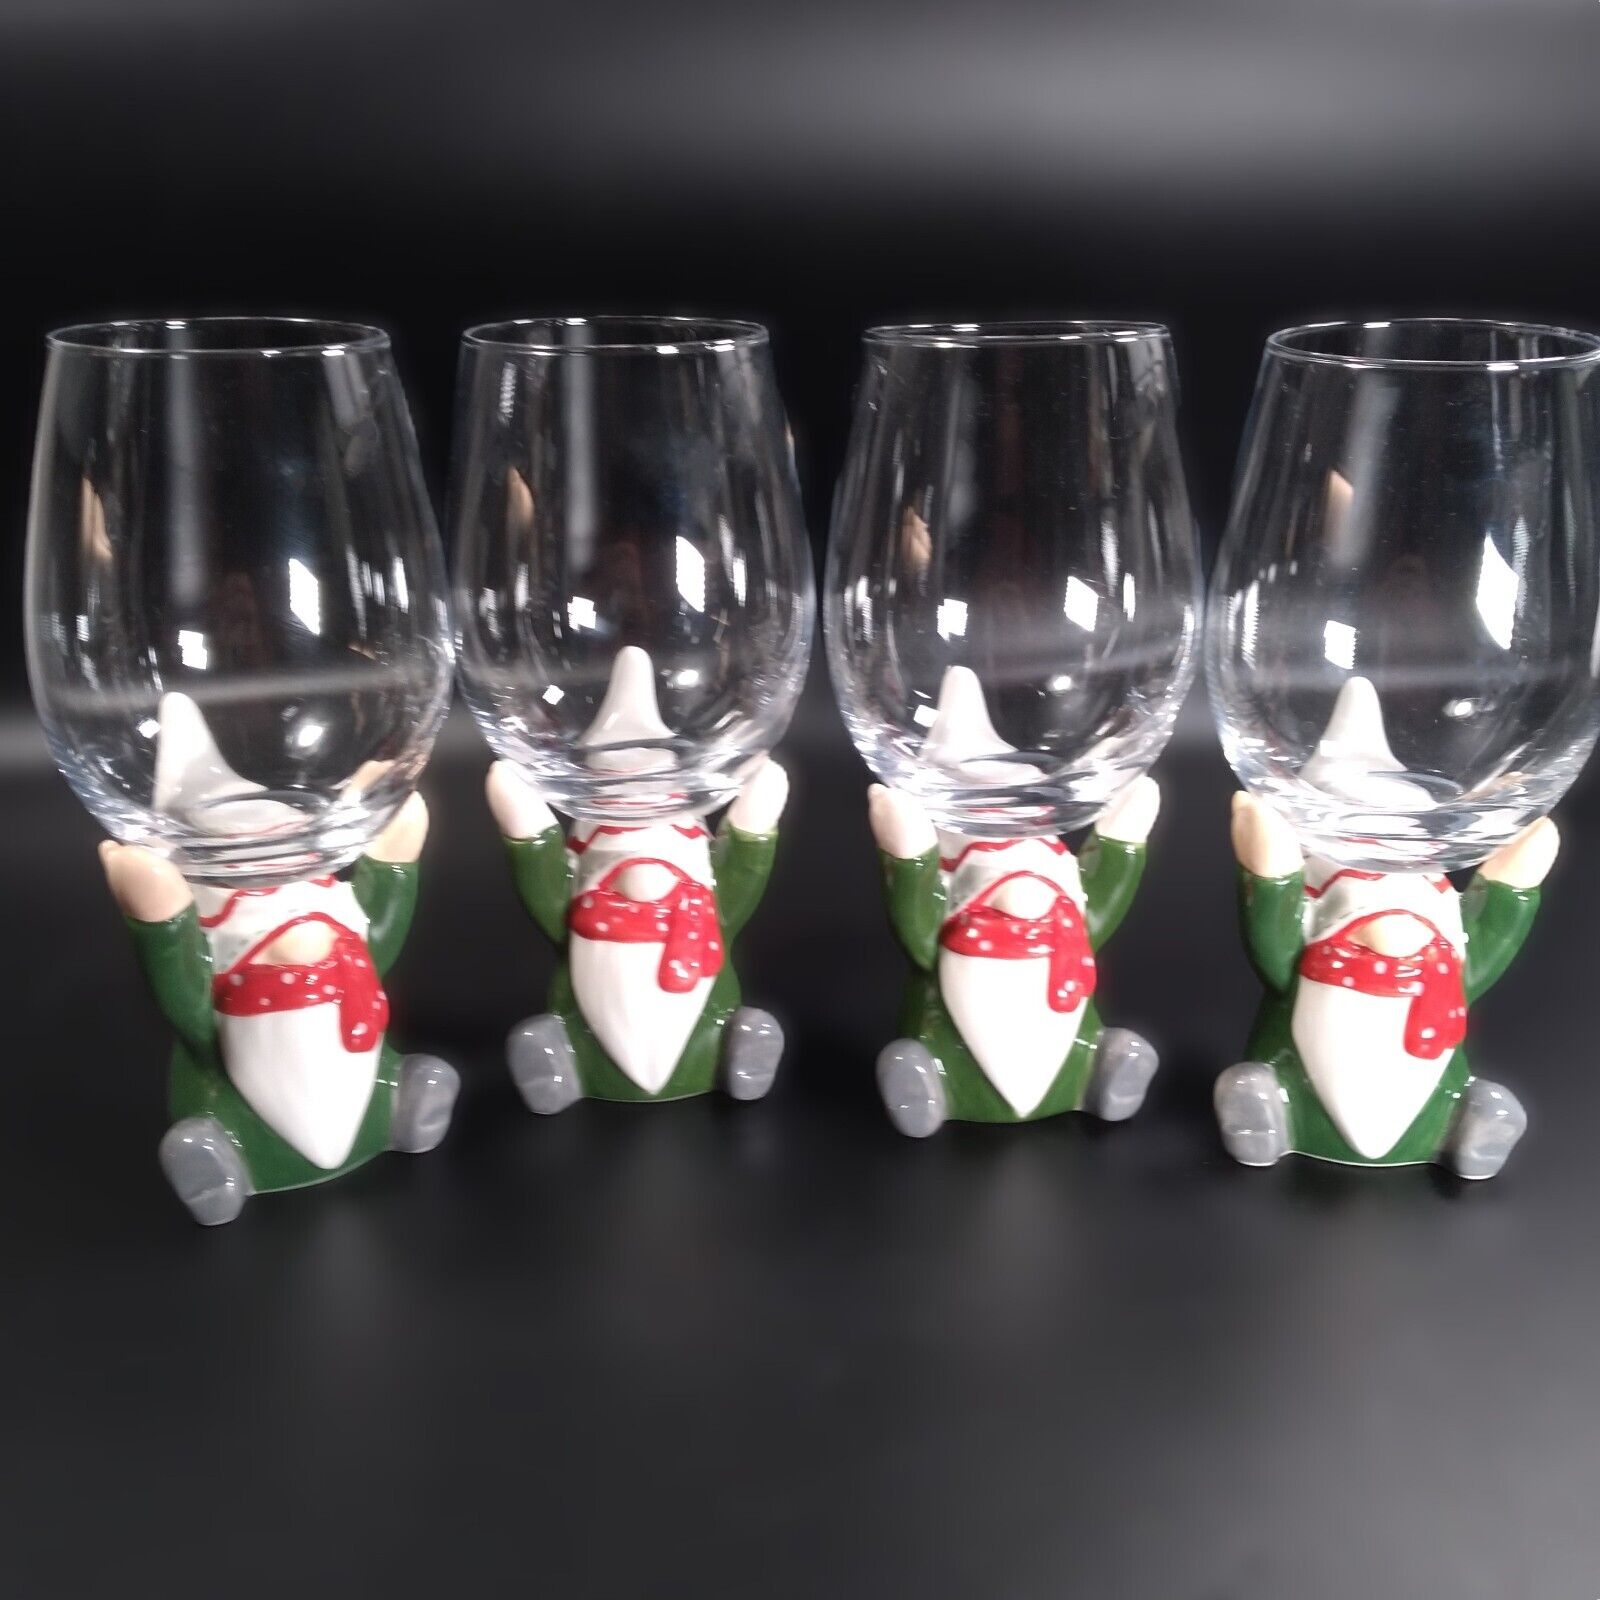 4 Gnome Wine Glasses Large Clear Glass Bowl held by Ceramic Christmas Gnome